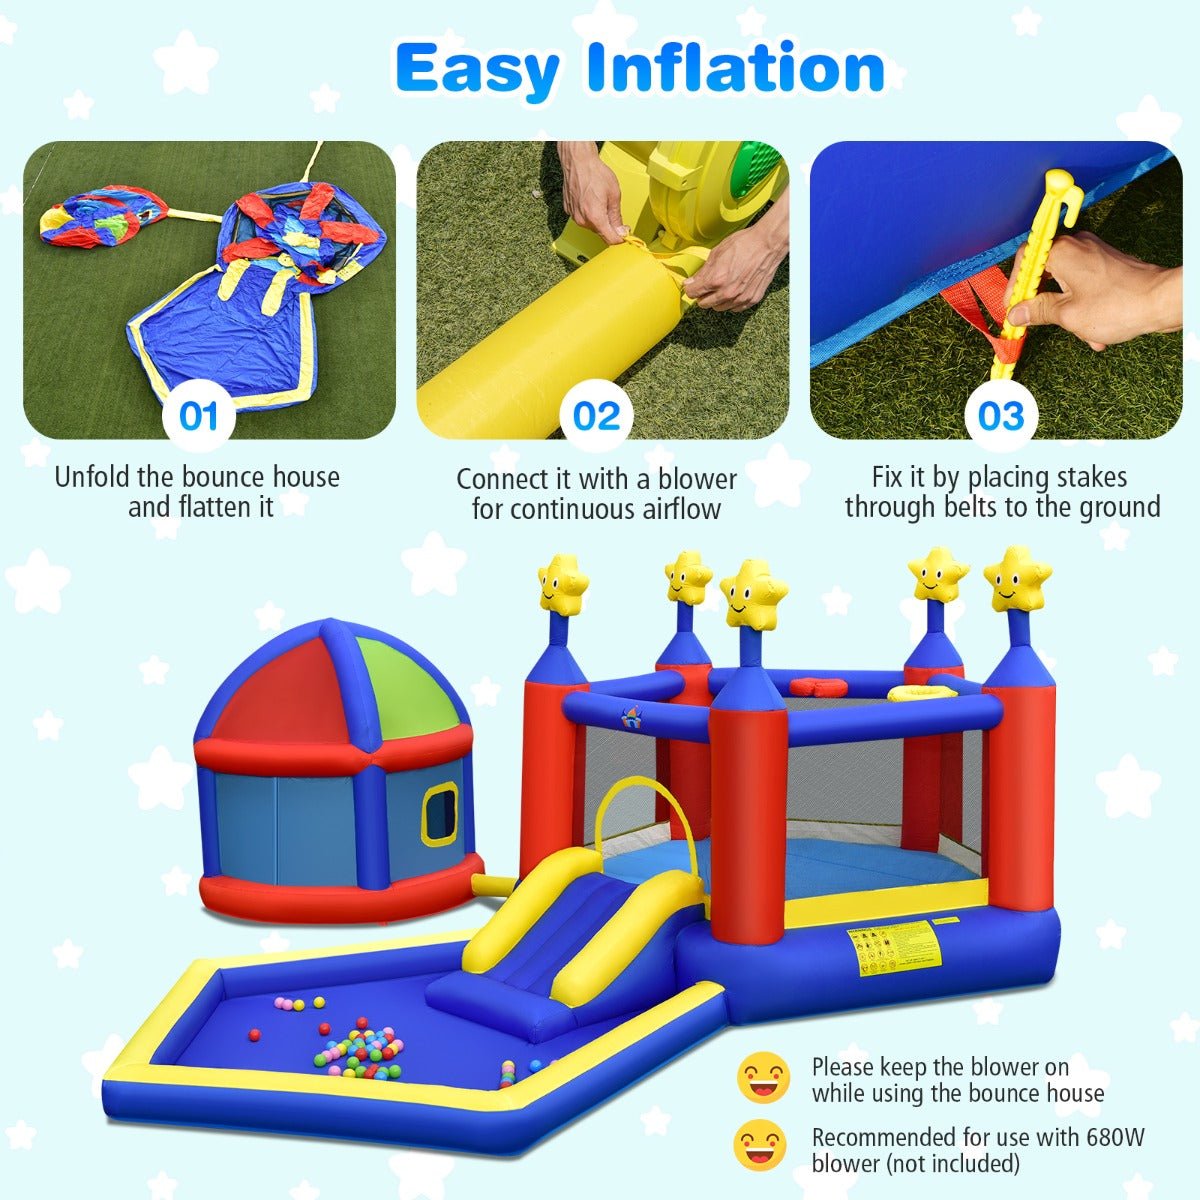 Children's Inflatable Bouncy House - Active Play with Two Basketball Hoops